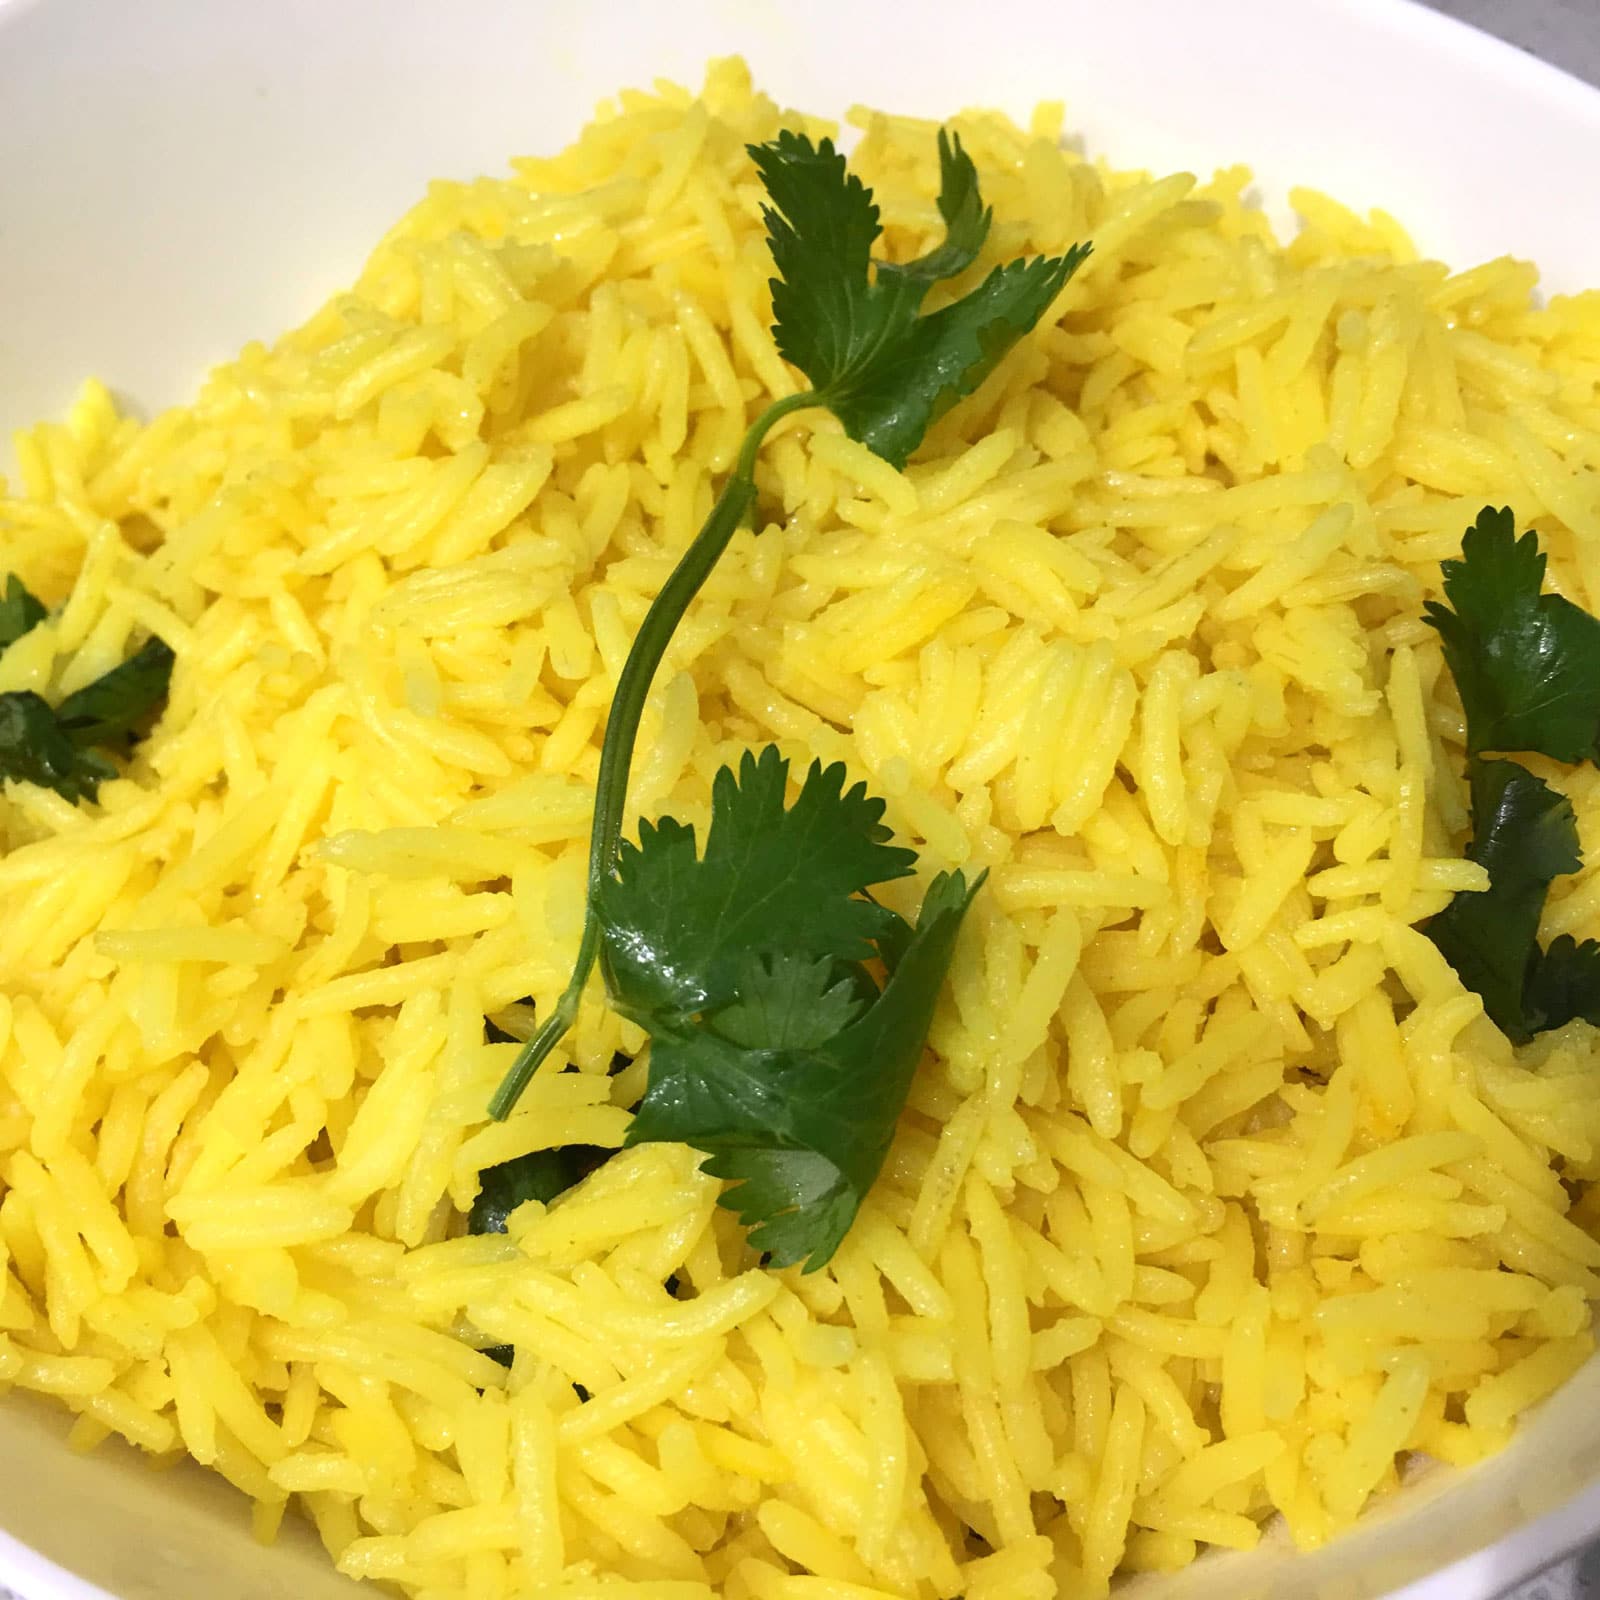 yellow rice garnished with cilantro leaves